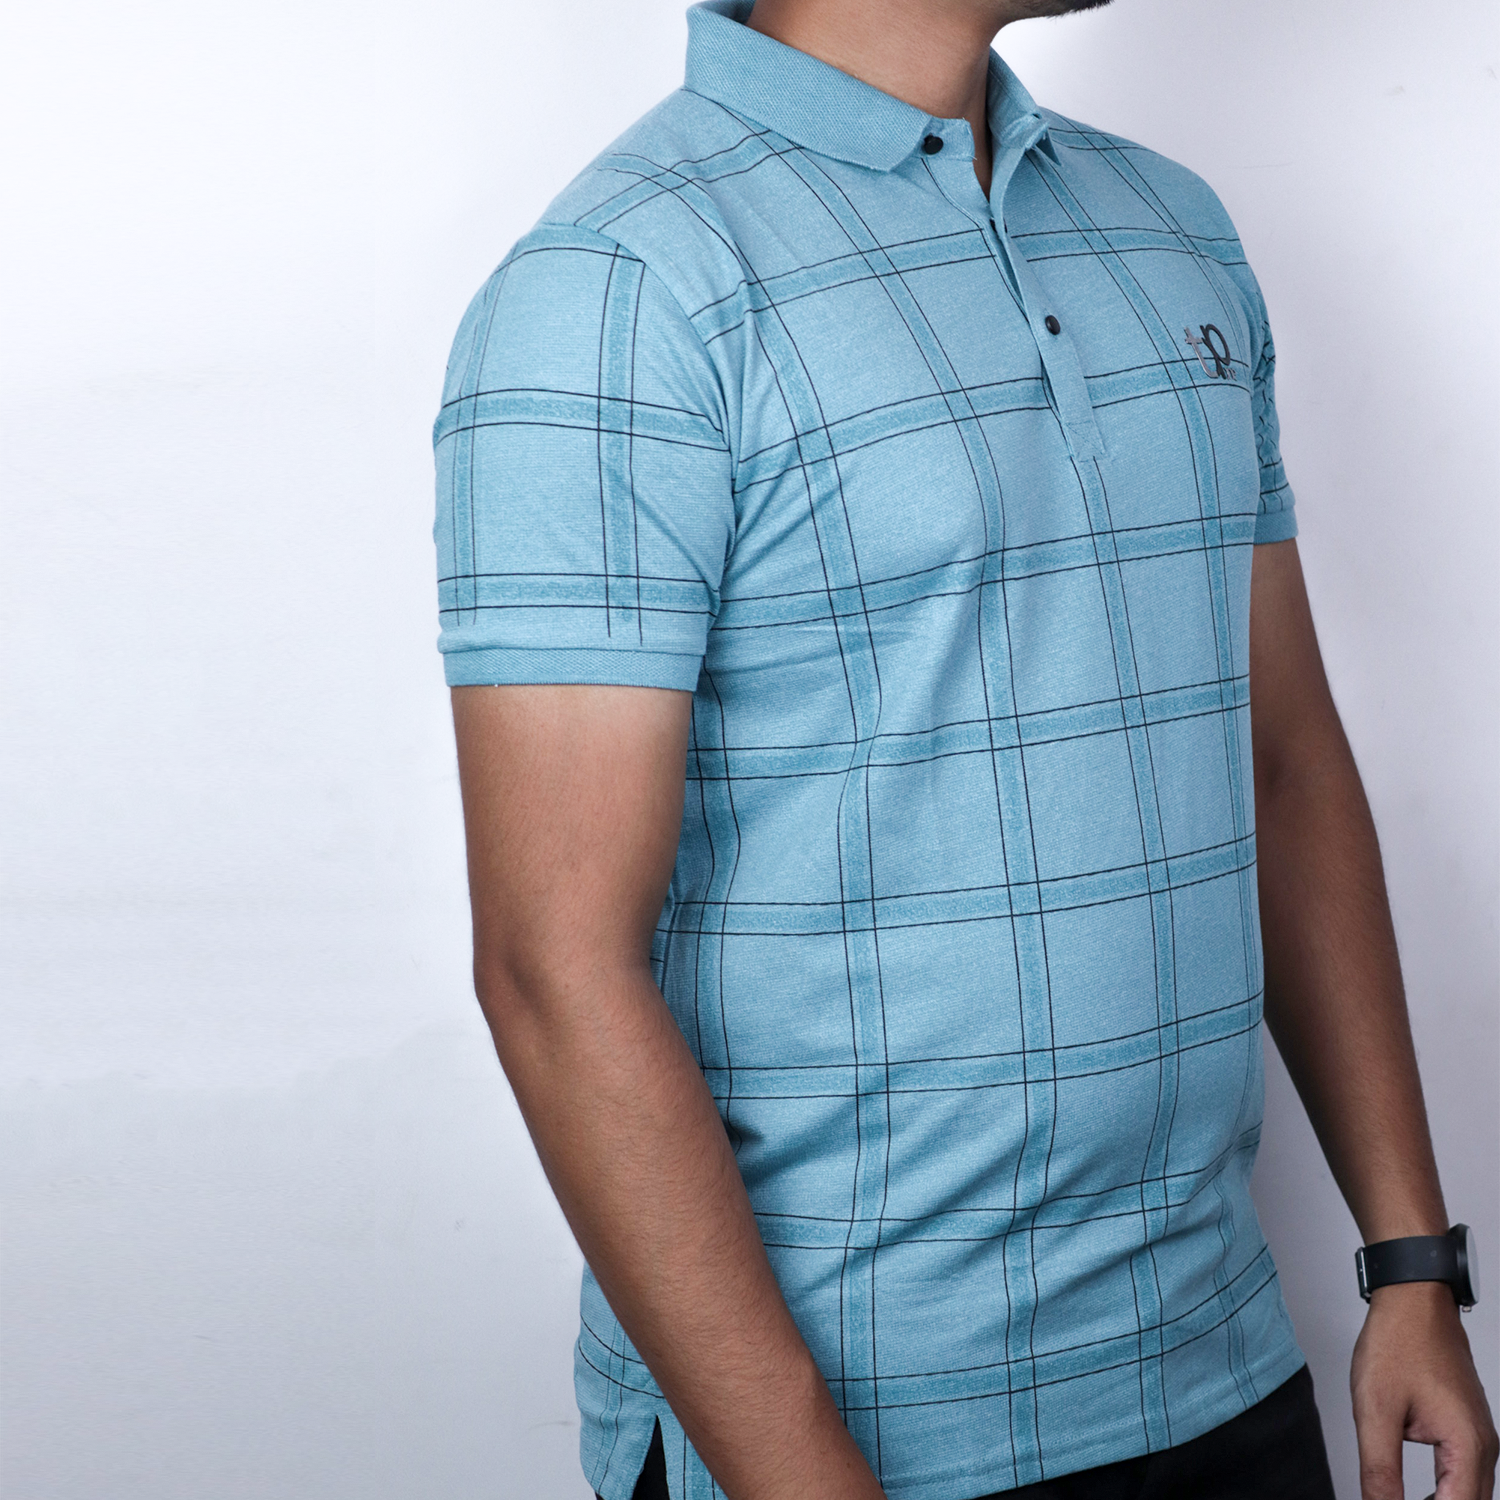 TOP ONE Striped Cotton Polo T Shirt